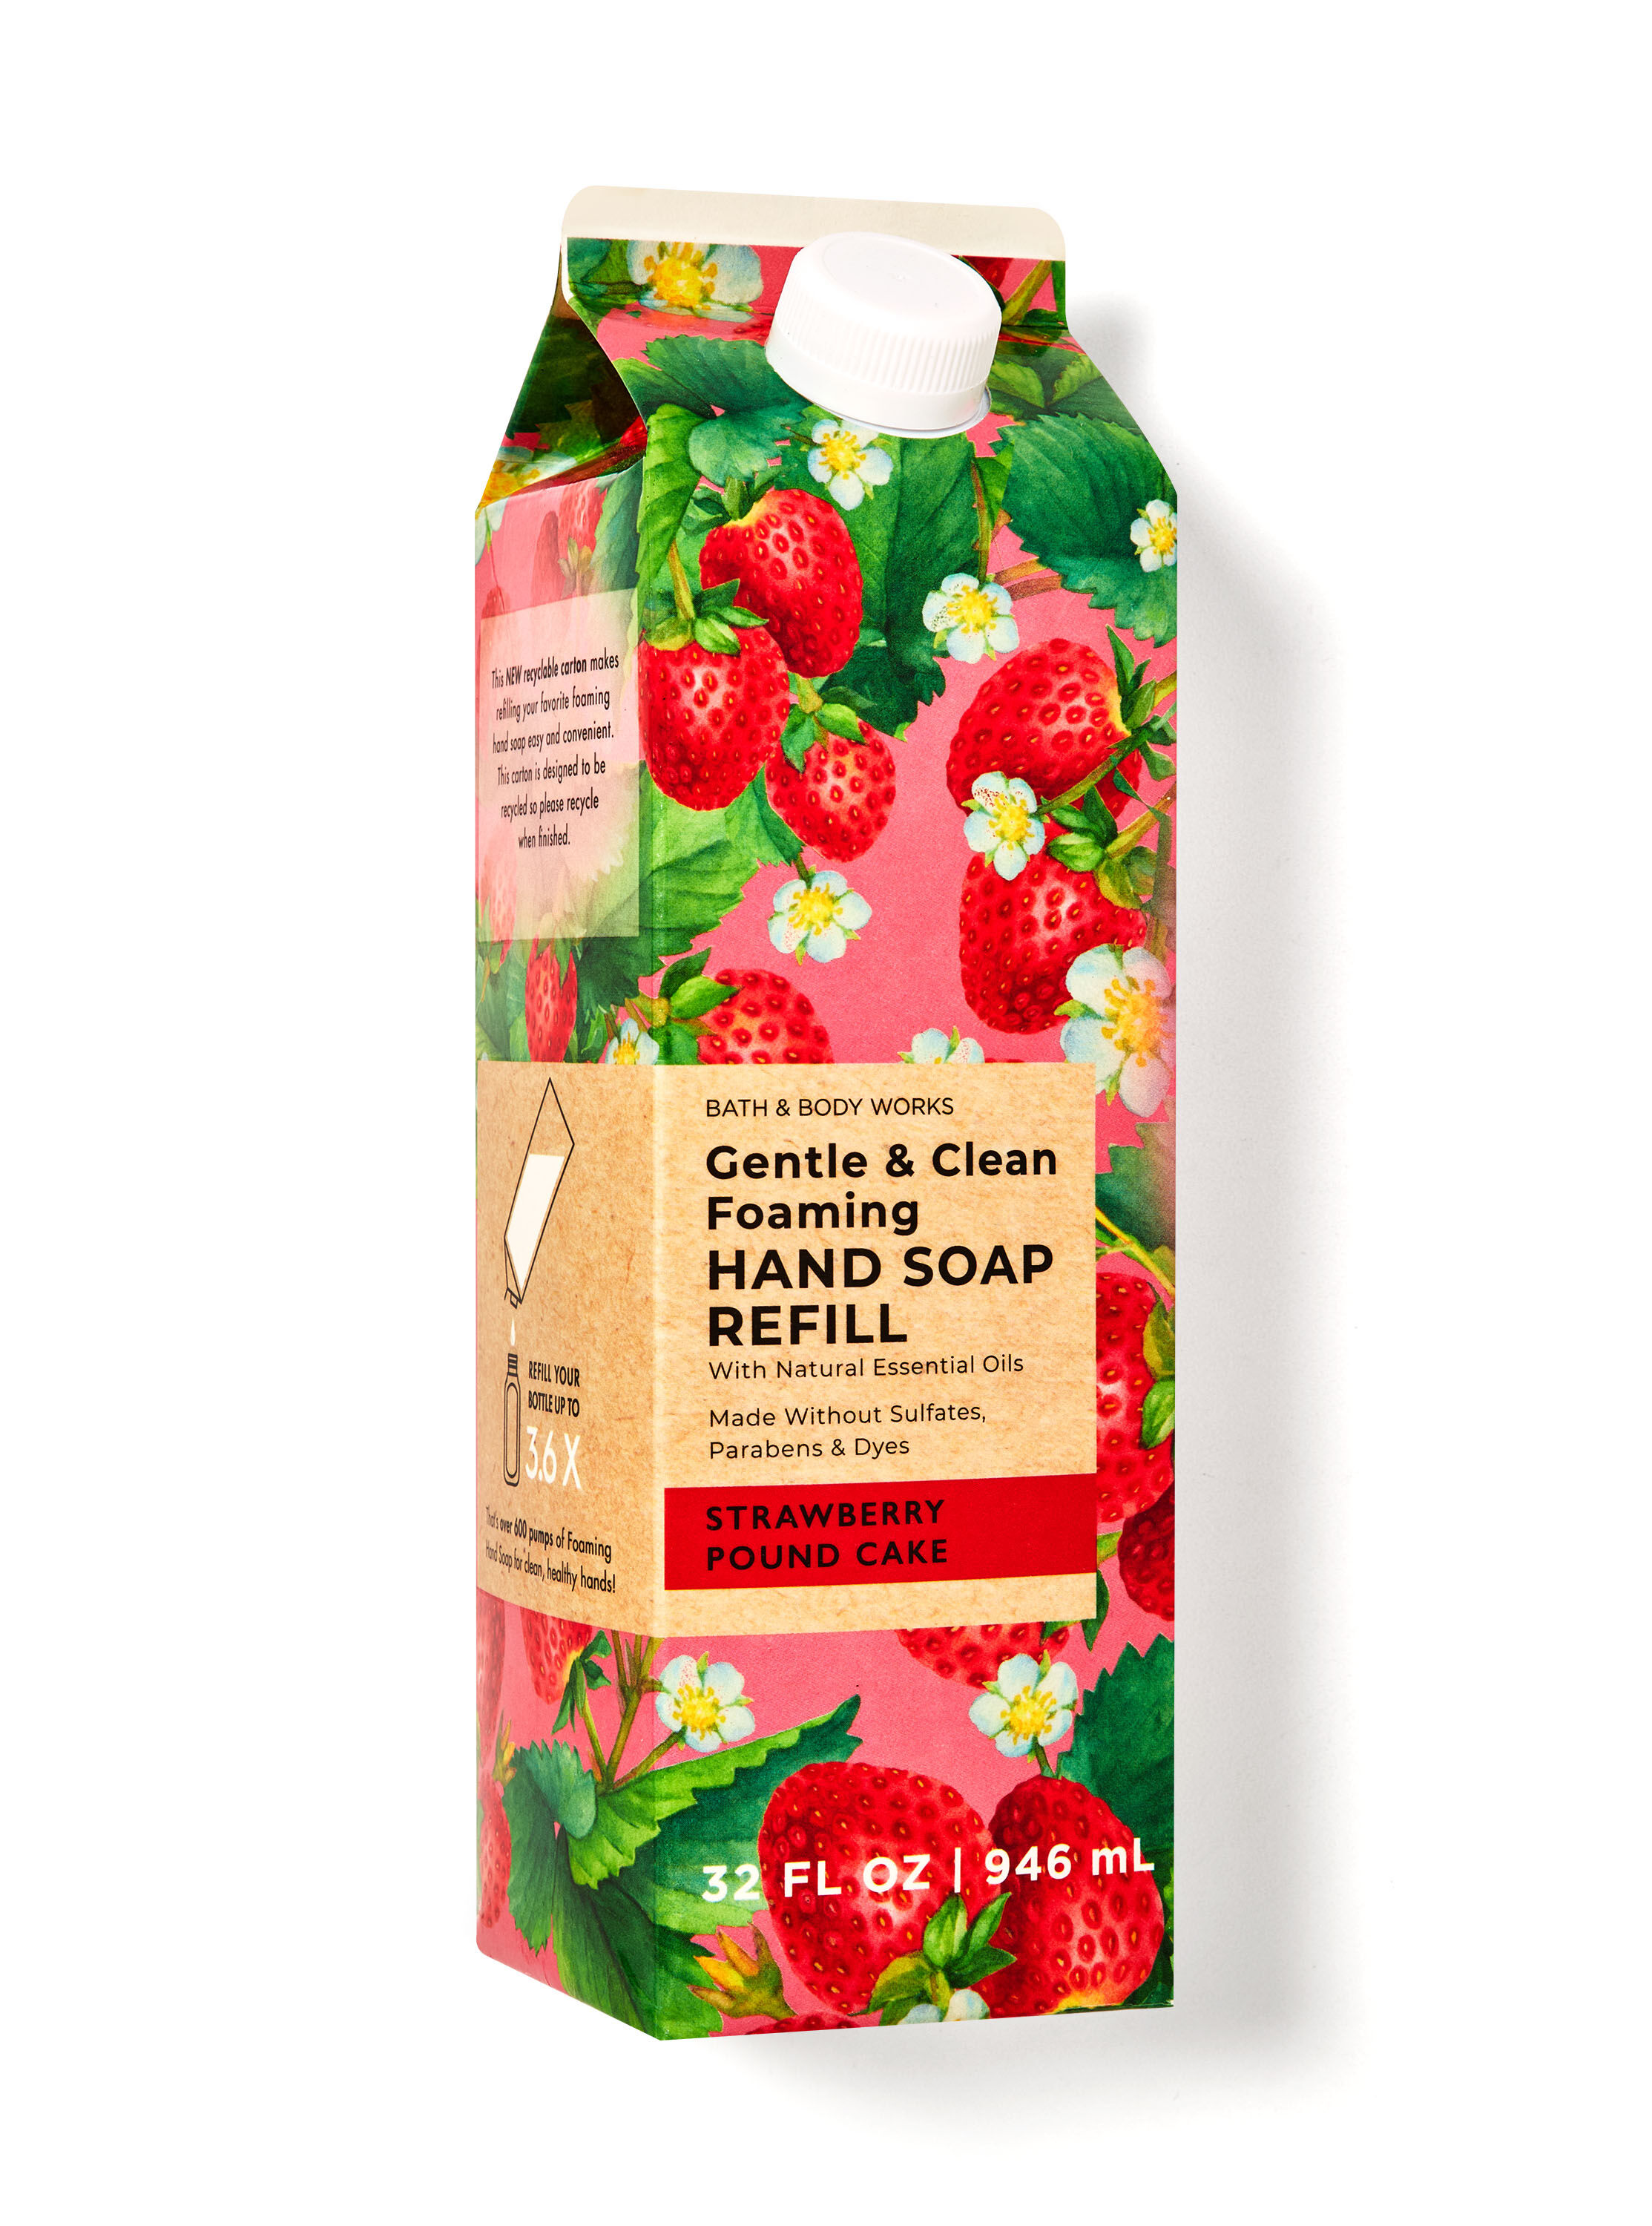 Strawberry Pound Cake Gentle & Clean Foaming Hand Soap Refill